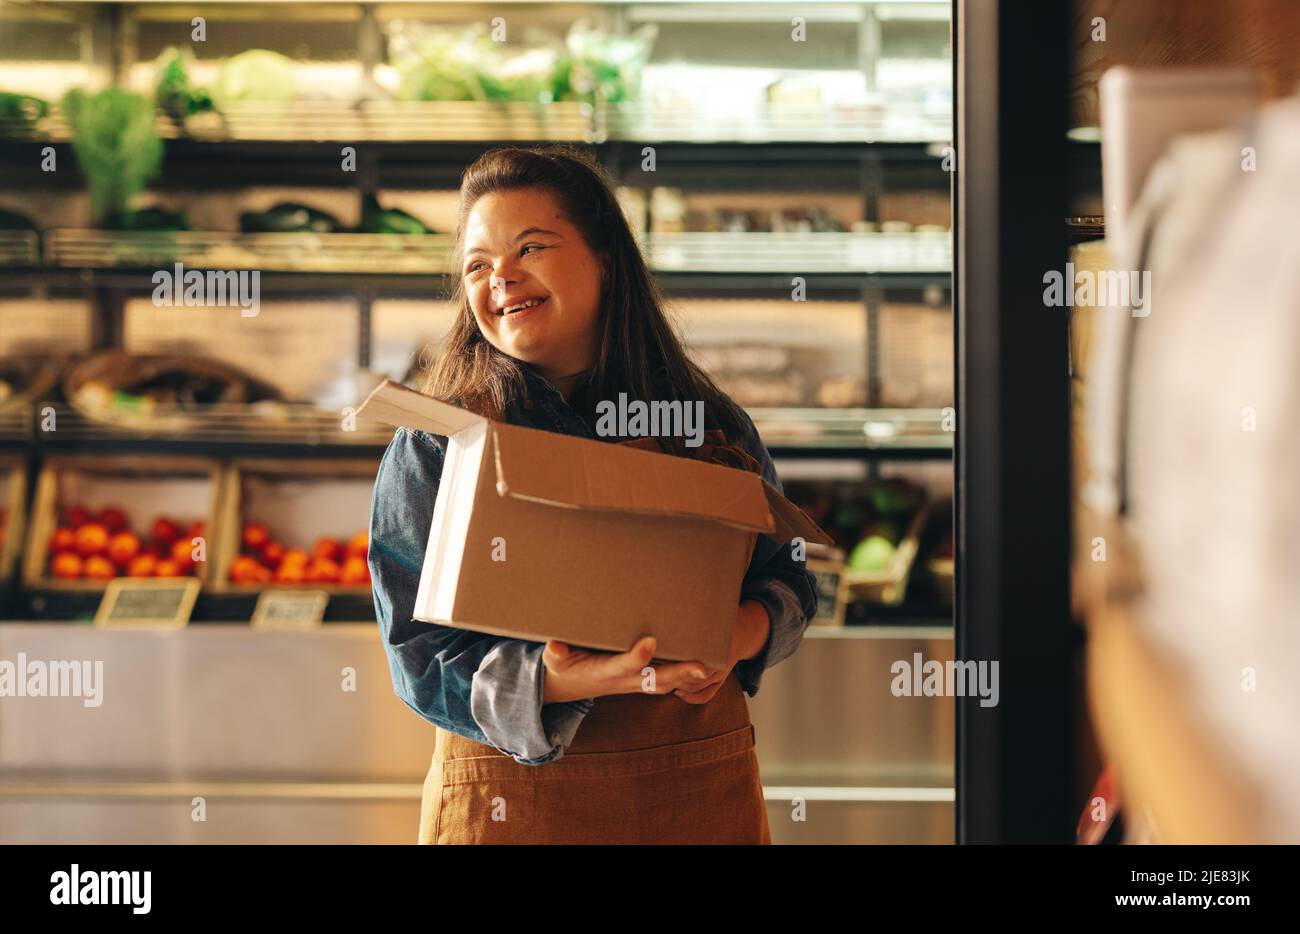 Woman with Down syndrome smiling happily while working as a shopkeeper in a grocery store. Empowered woman with an intellectual disability restocking Stock Photo